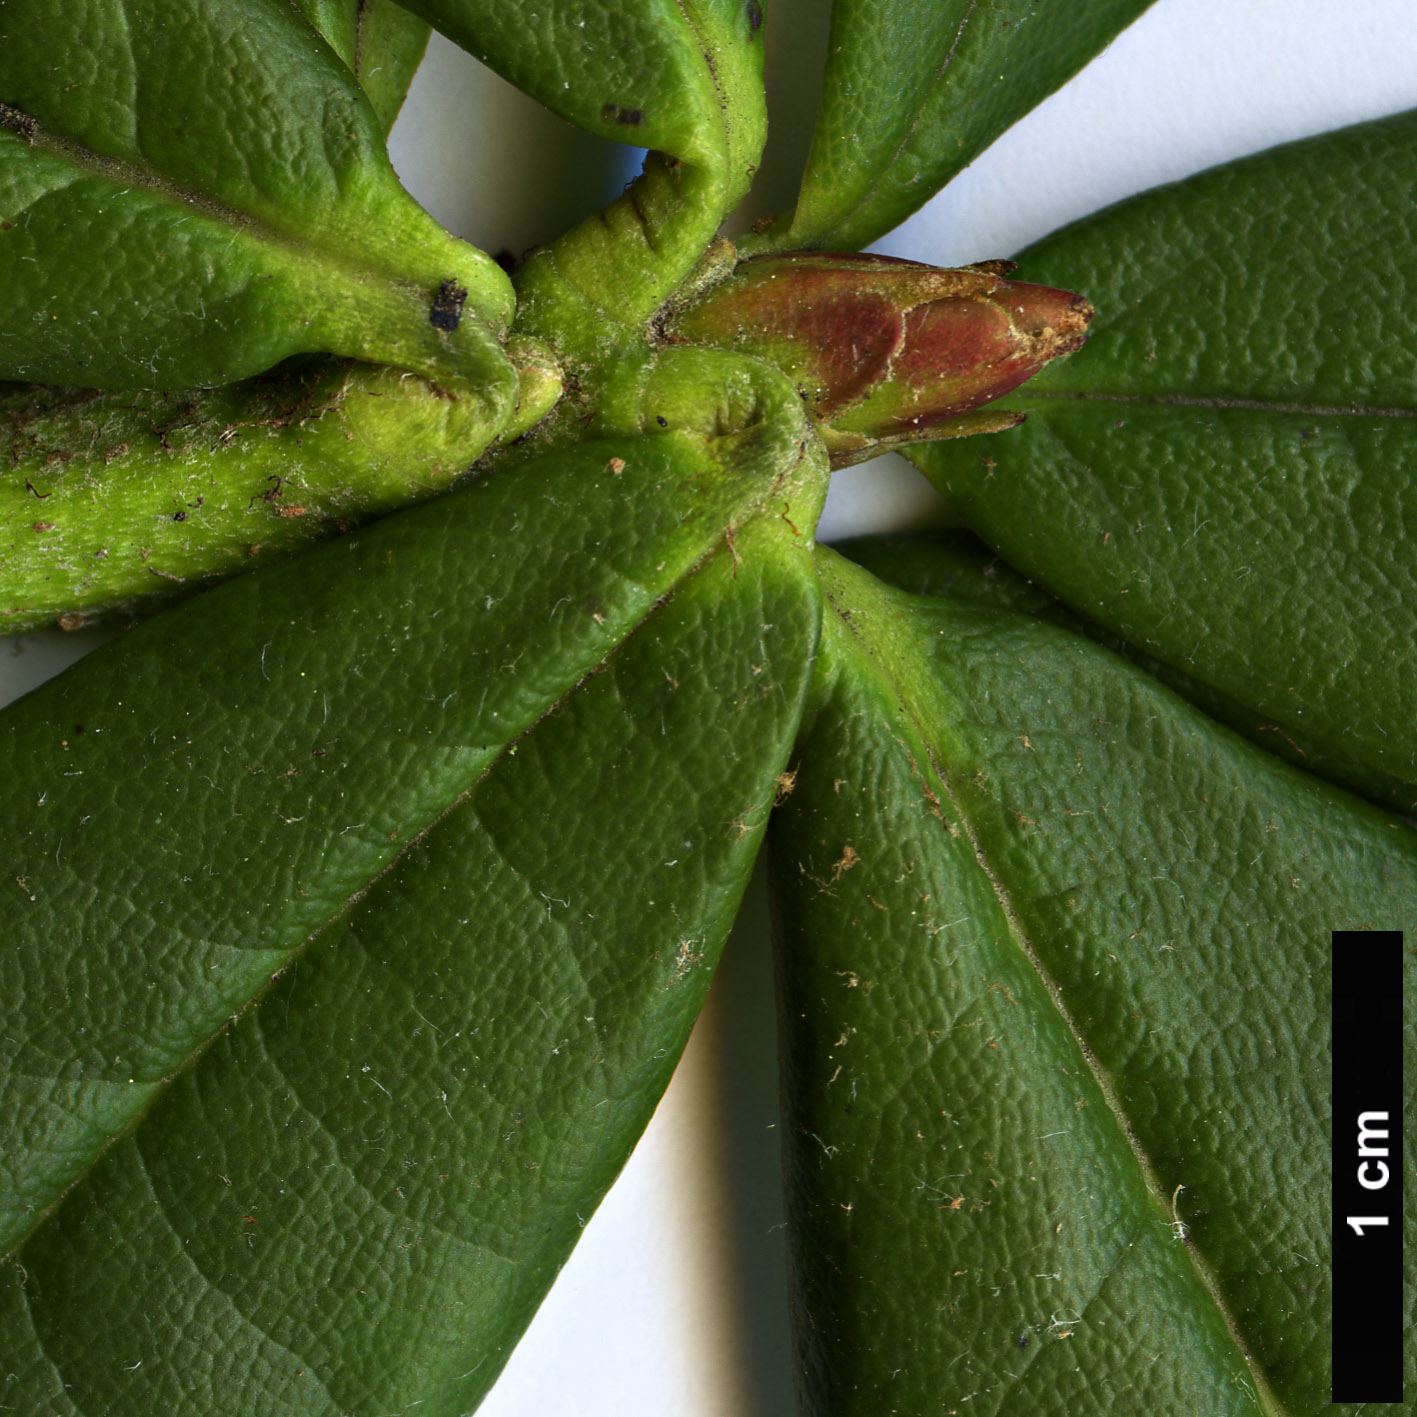 High resolution image: Family: Ericaceae - Genus: Rhododendron - Taxon: microgynum